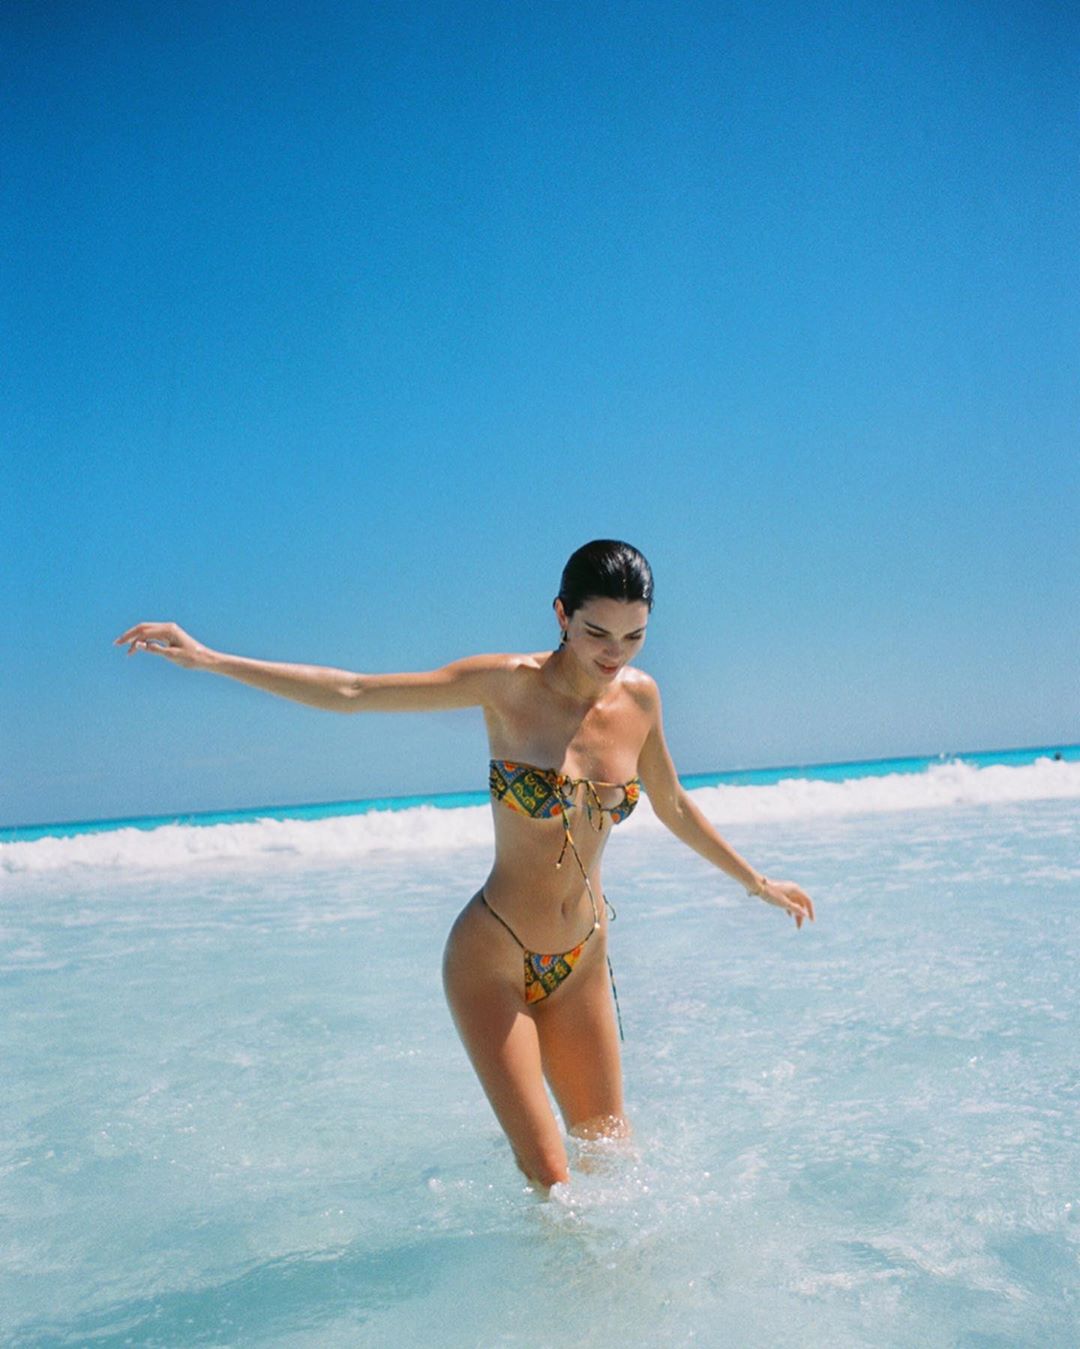 NBA WAG Kendall Jenner is On Vacation! - Photo 16